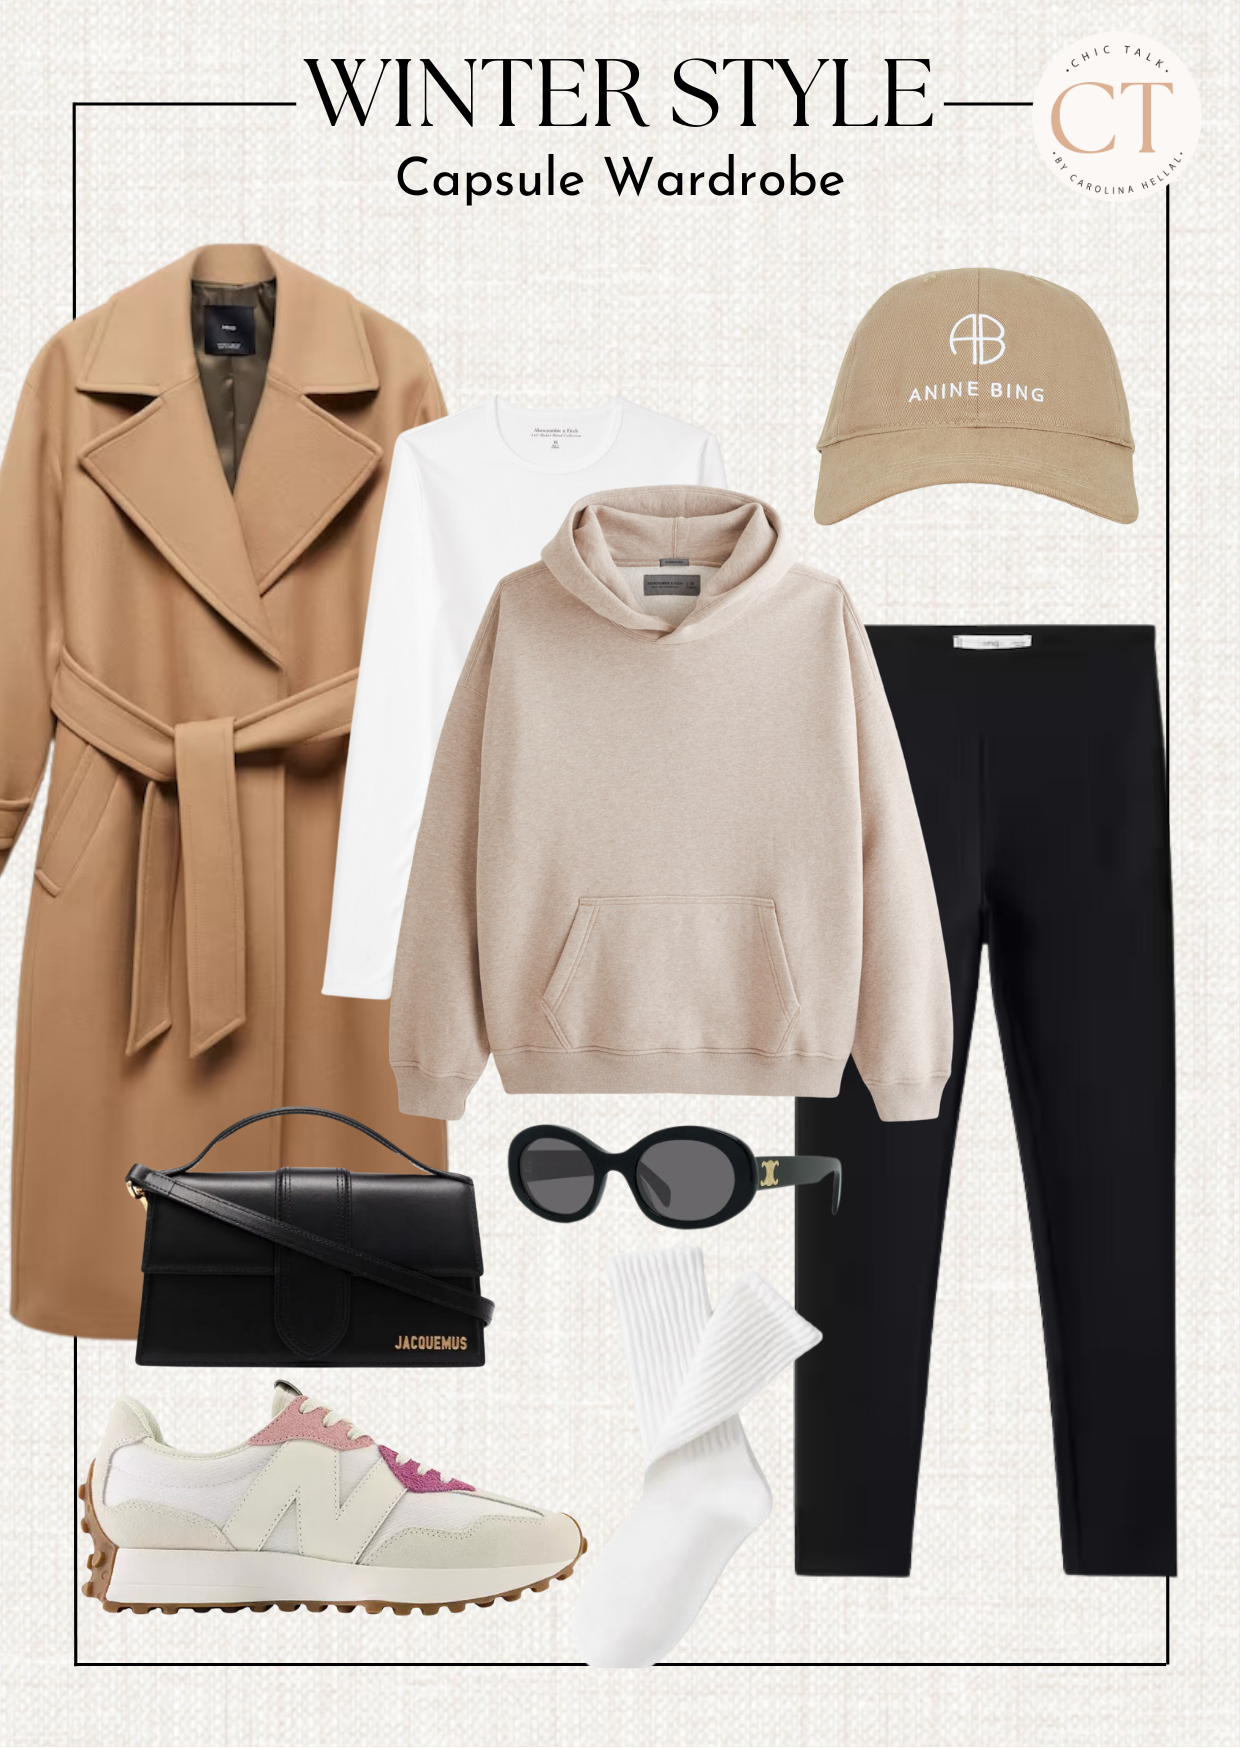 Winter style guide  by CHIC TALK